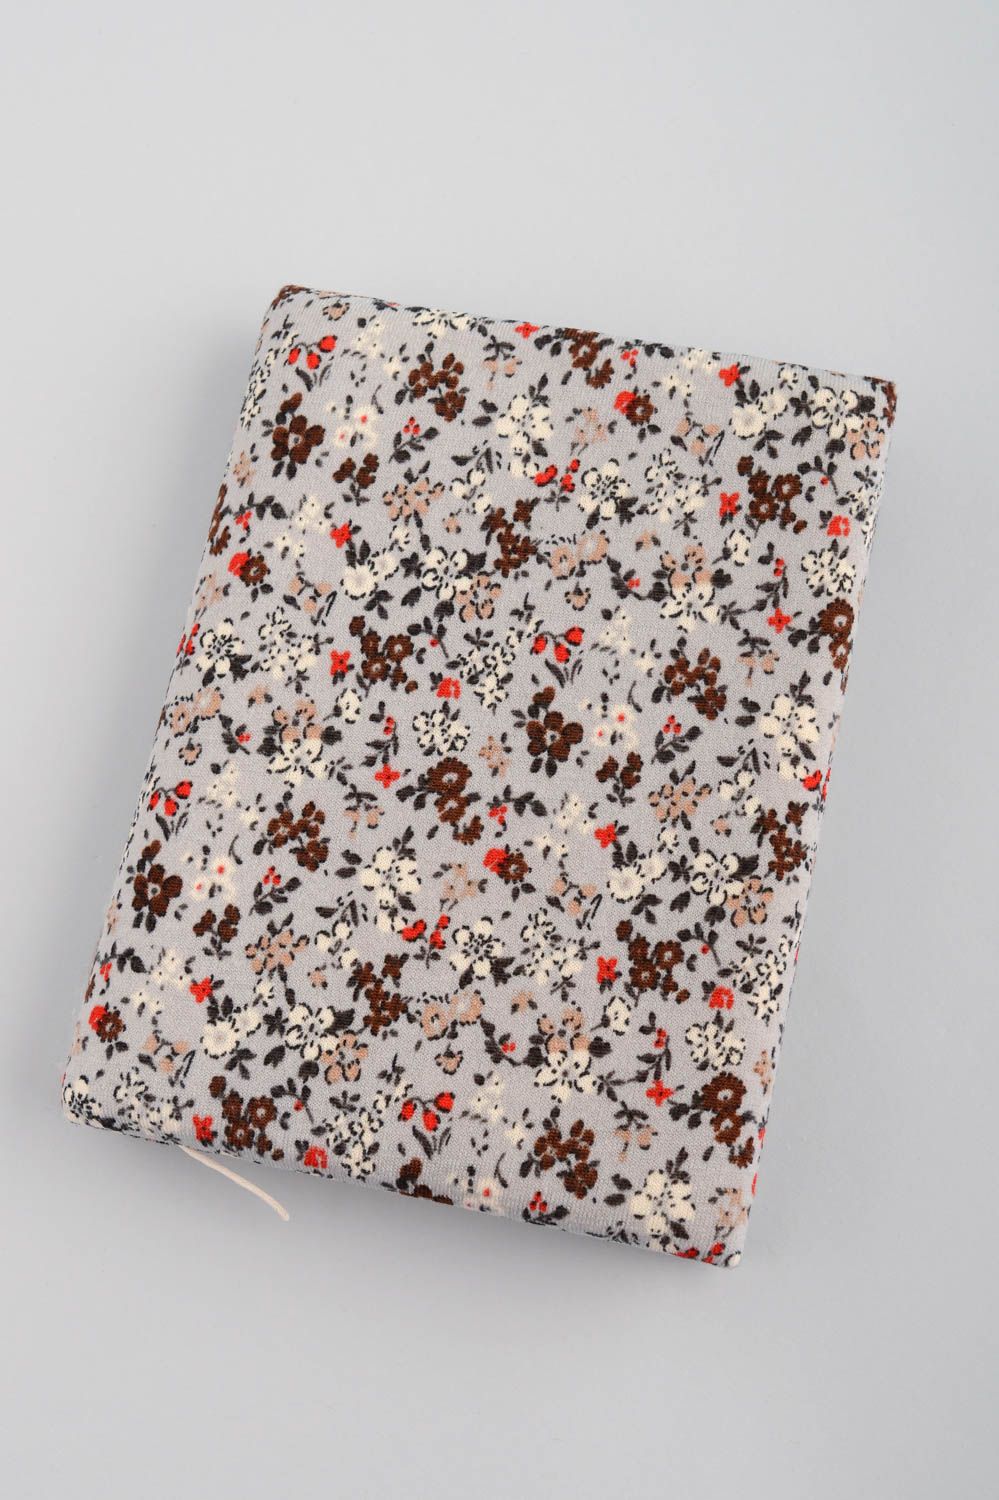 Handmade designer notebook with gray fabric cover with floral pattern photo 2